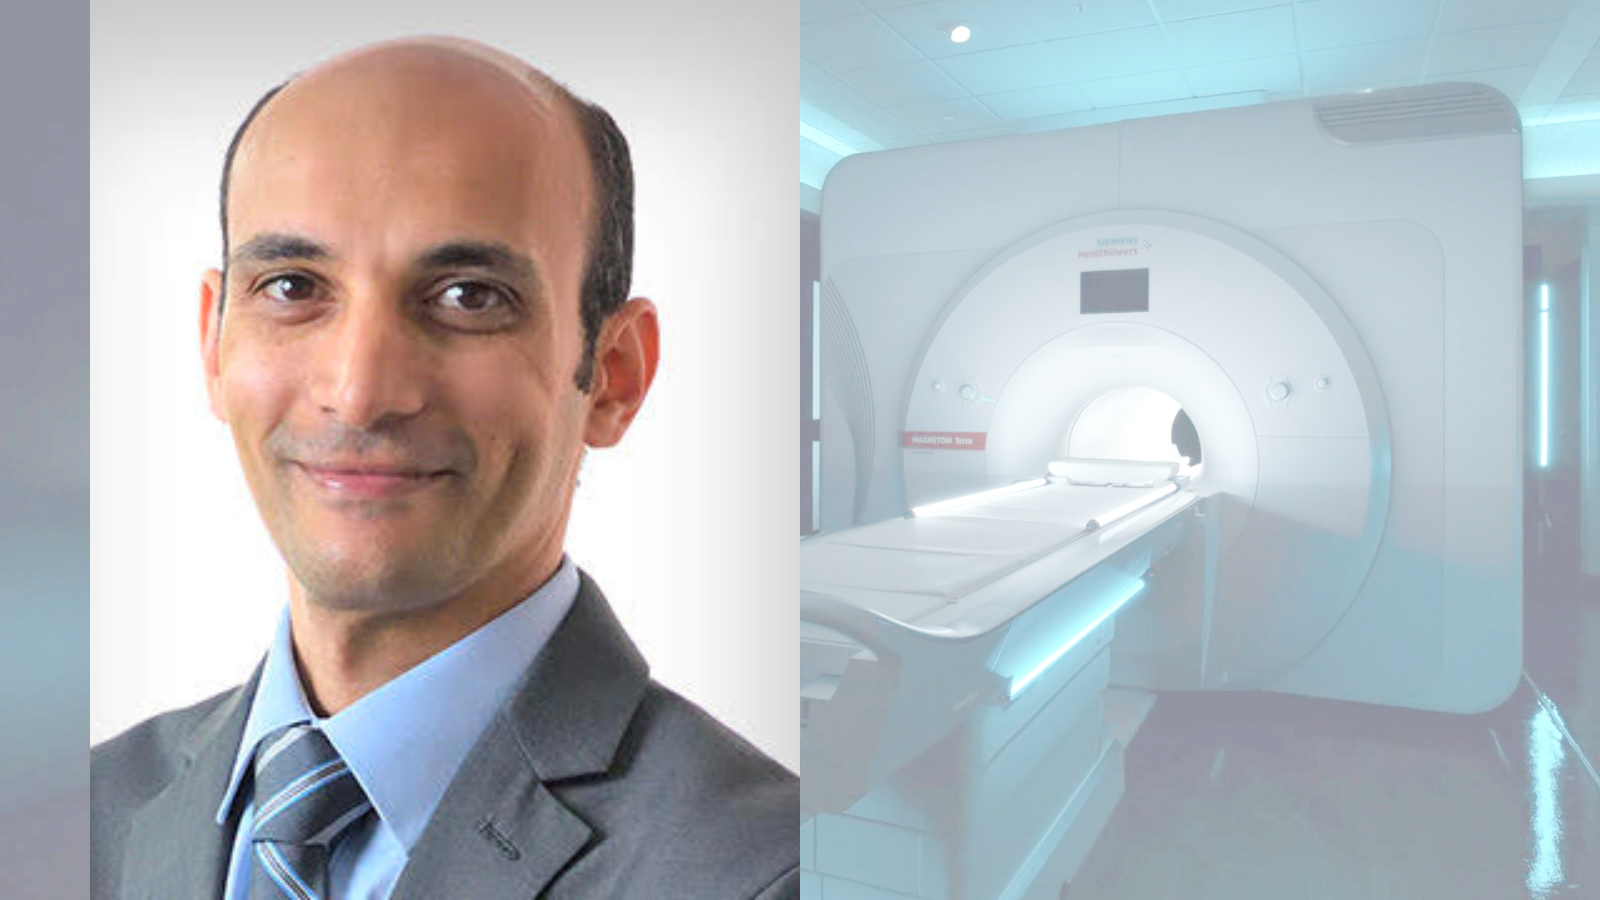 A headshot of Wael Mostafa is superimposed over an image of the 7 Tesla MRI scanner located at the Carle Illinois Advanced Imaging Center.